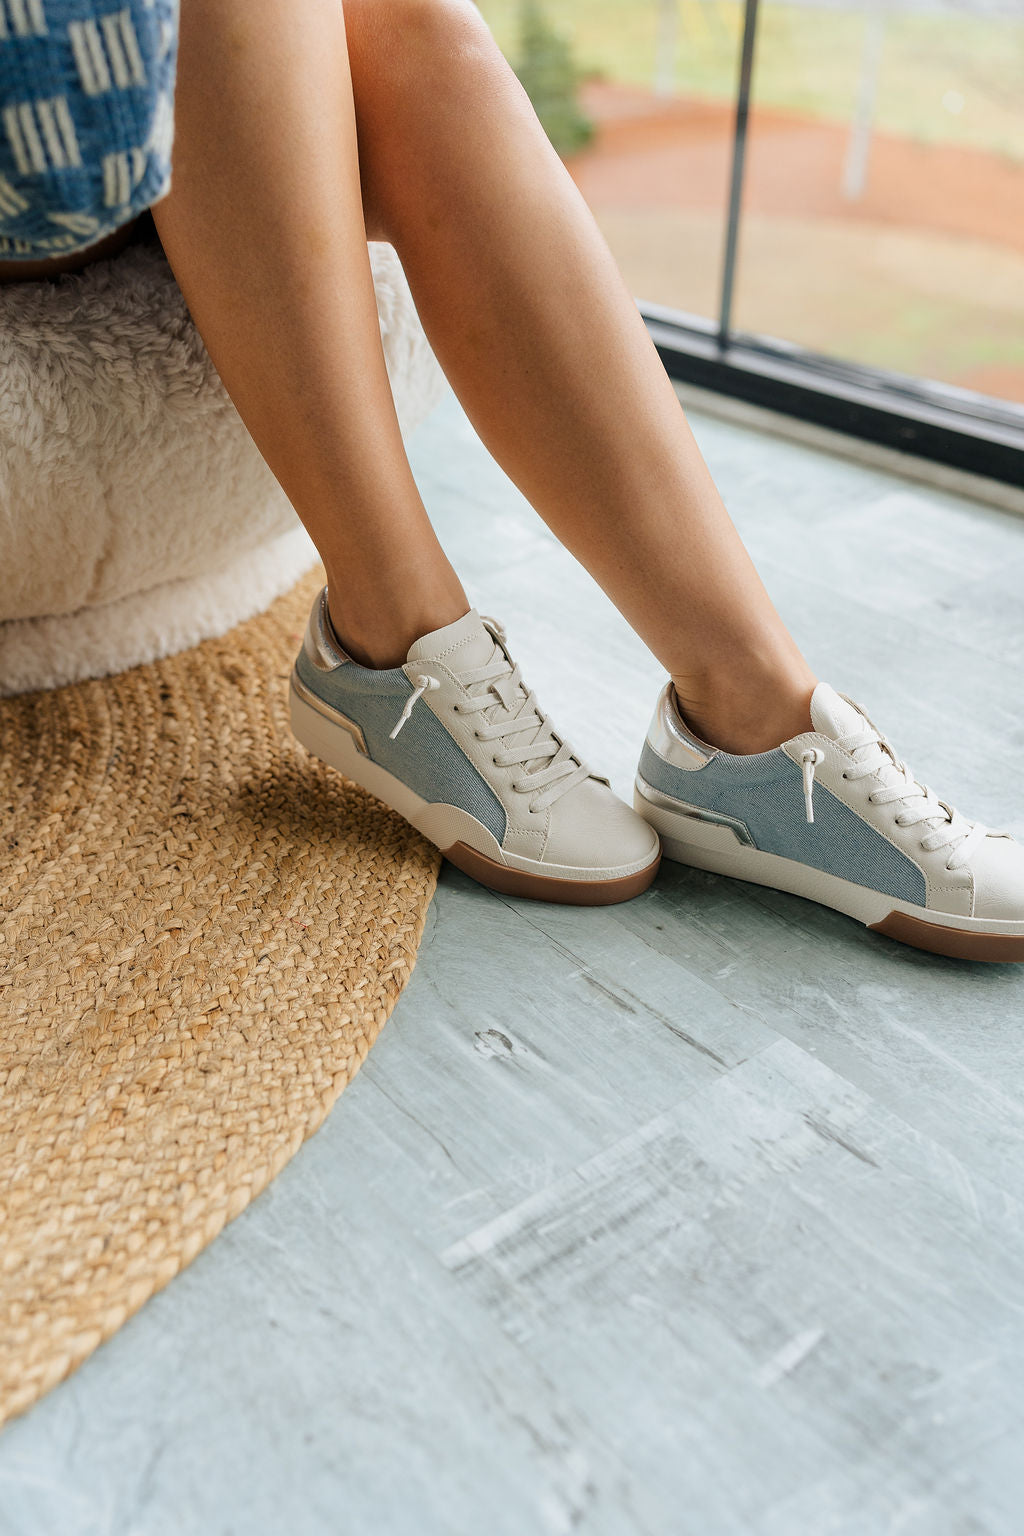 Side view of female model wearing the Helix Sneaker in Denim which features Light Wash Denim Fabric & White Faux Leather Fabric,  Silver Metallic and Light Brown Details, Lace-Up Details and Round Toe.